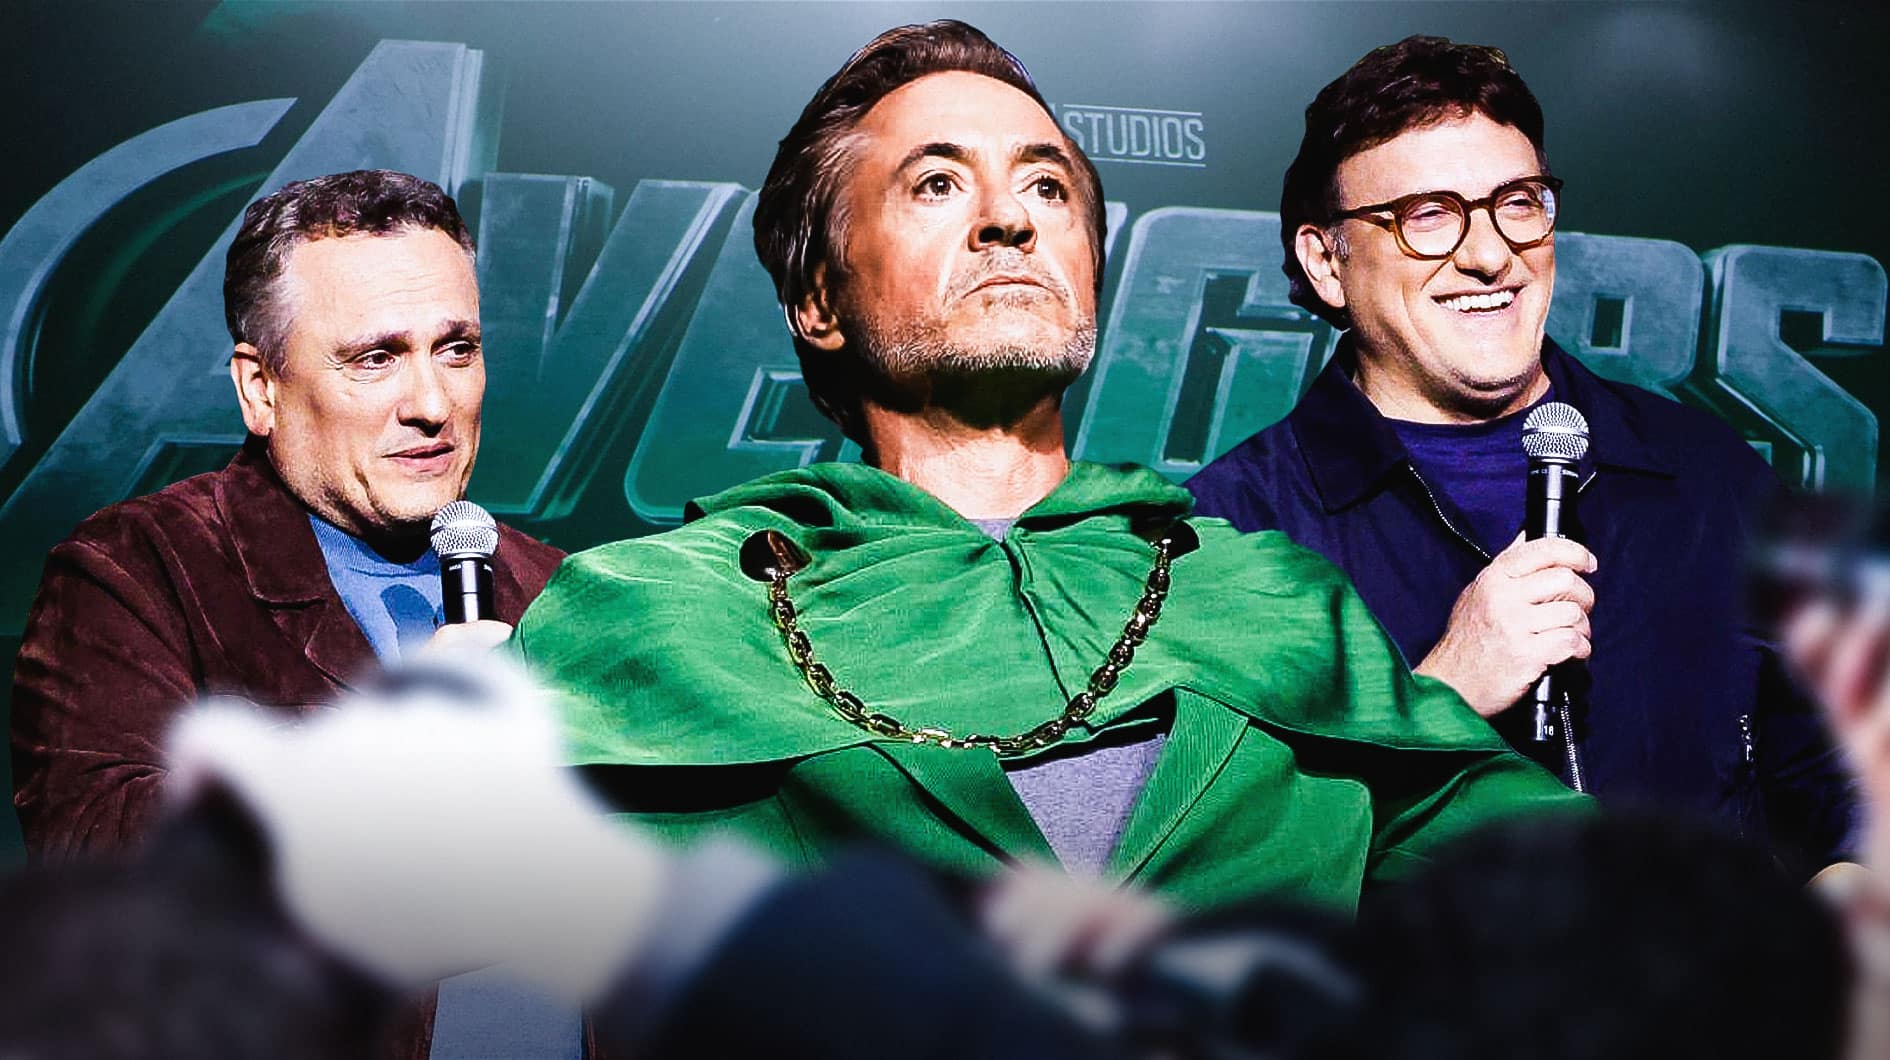 Joe and Anthony Russo (the Russo Brothers) with Robert Downey Jr as Doctor Doom at San Diego Comic-Con in the middle with Marvel Avengers: Doomsday logo behind them.